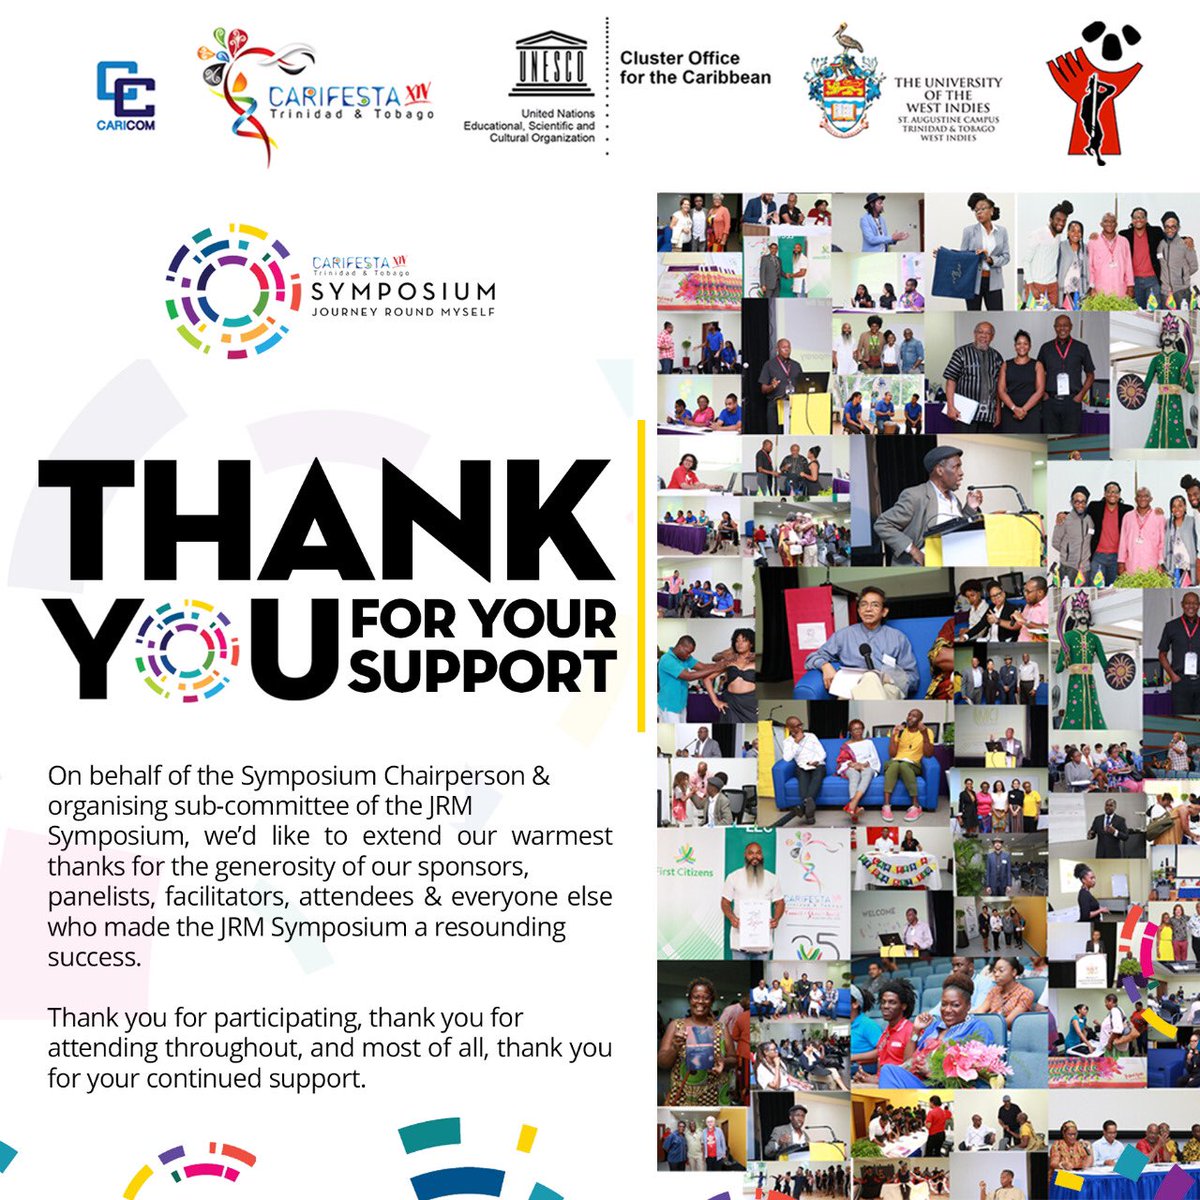 The @CARIFESTA2019 JRM Symposium would not have been such a resounding #success without your support. 

Thank you! 😃 👏🏾 

#Carifesta2019 
#CultureMatters
#Arts 
#Culture 
#Caribbean